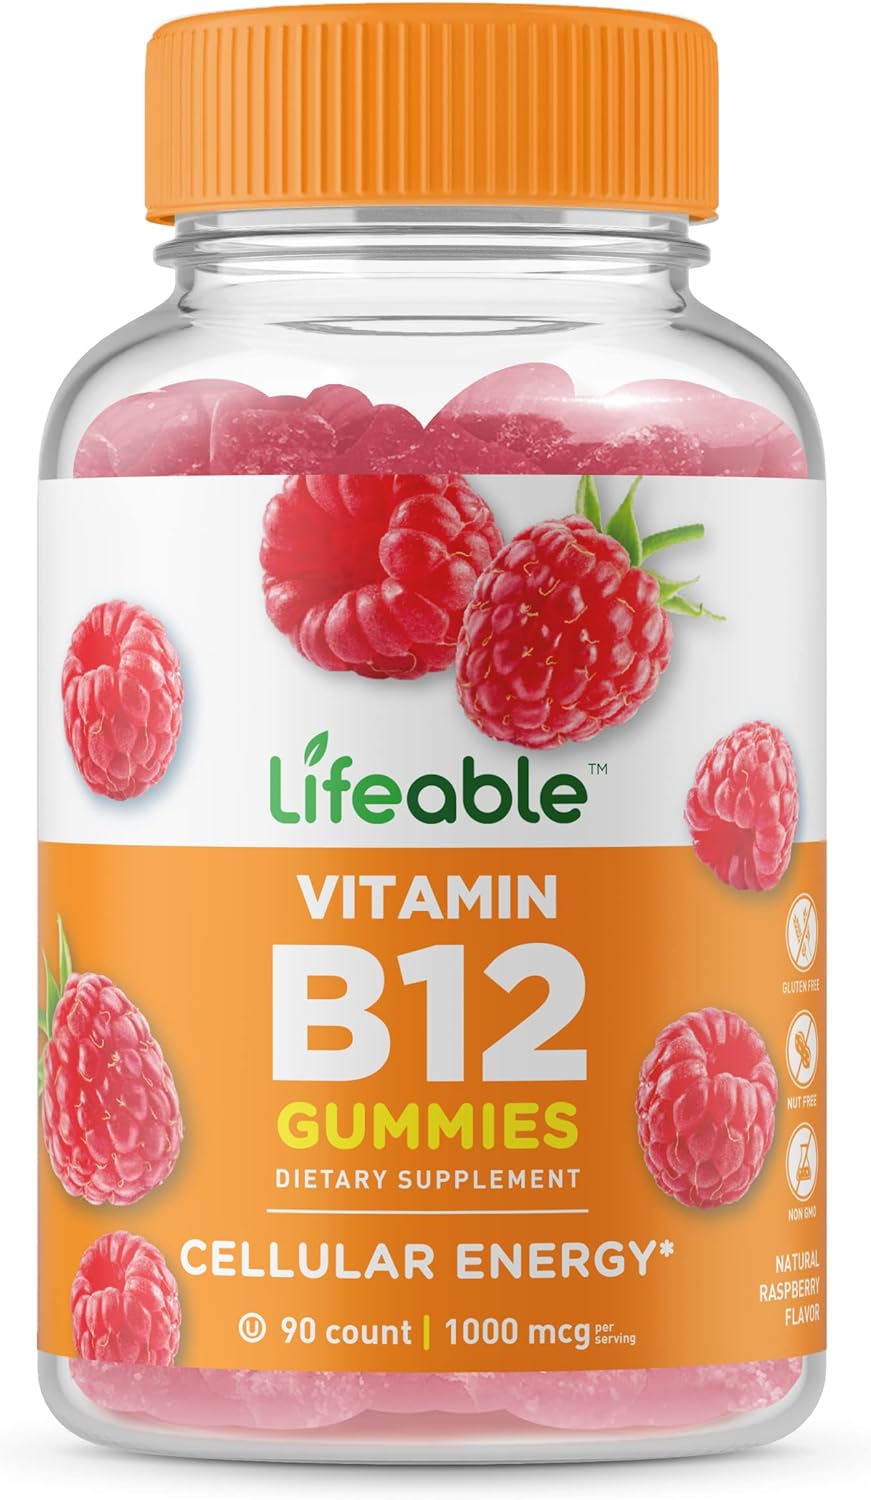 Lifeable Vitamin B12 1000 mcg - Great Tasting Natural Flavor Gummy Supplement Vitamins - Gluten Free Vegetarian Chewable B 12 - for Energy, Mood, Metabolism Support - for Adults Men Women - 90 Gummies